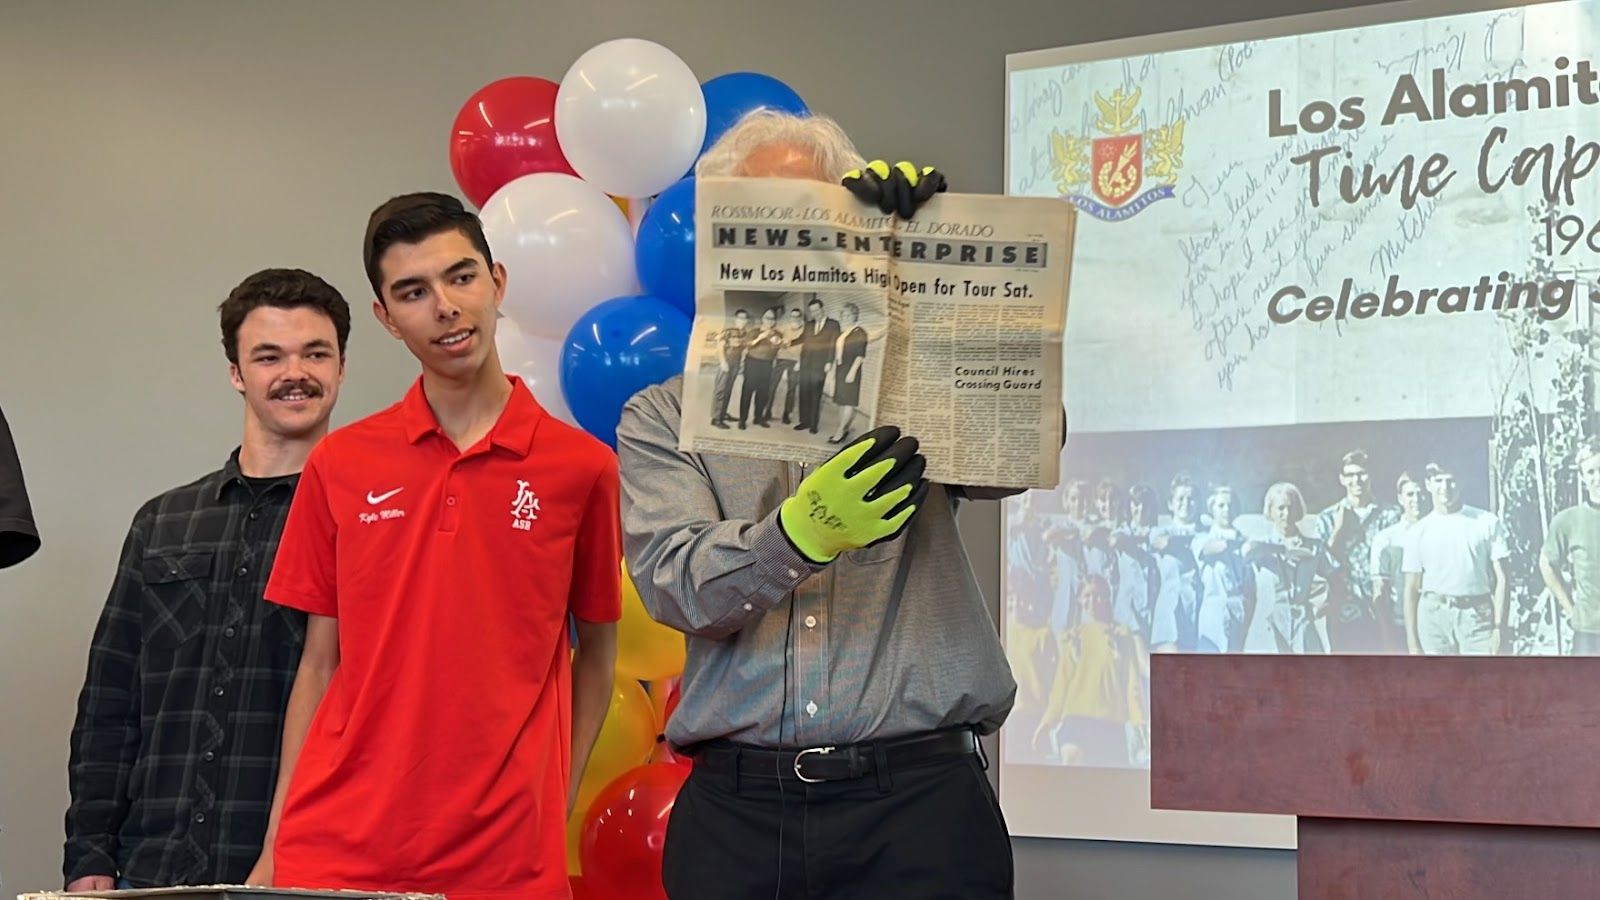 An old edition of the local newspaper now known as the Event-News Enterprise was among the items contained in time capsule from 1970 that was opened last week at Los Alamitos High School. Photo courtesy of Nichole Pichardo of the Los Alamitos Unified School District.